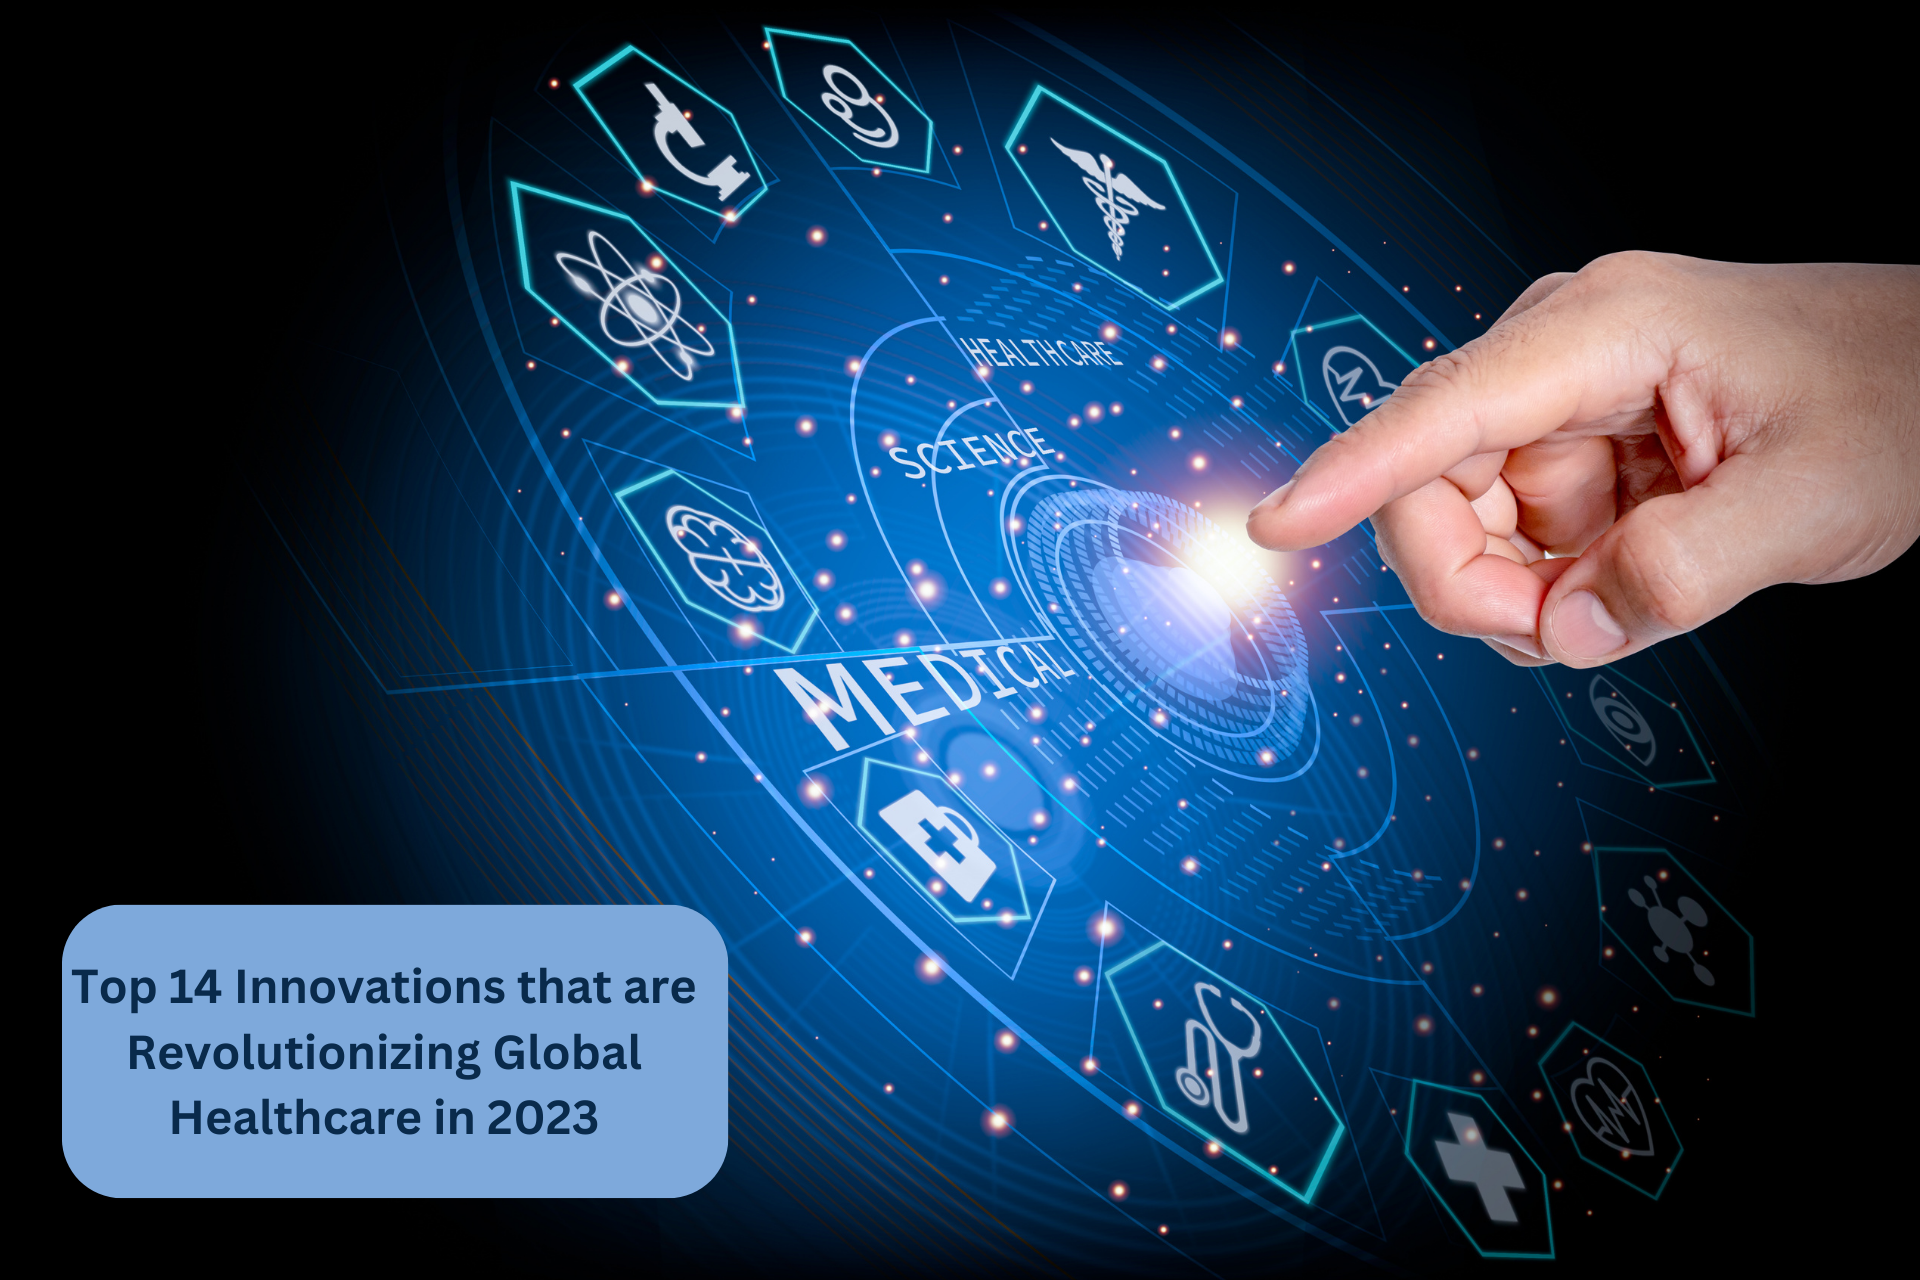 Top 14 Innovations that are Revolutionizing Global Healthcare in 2023